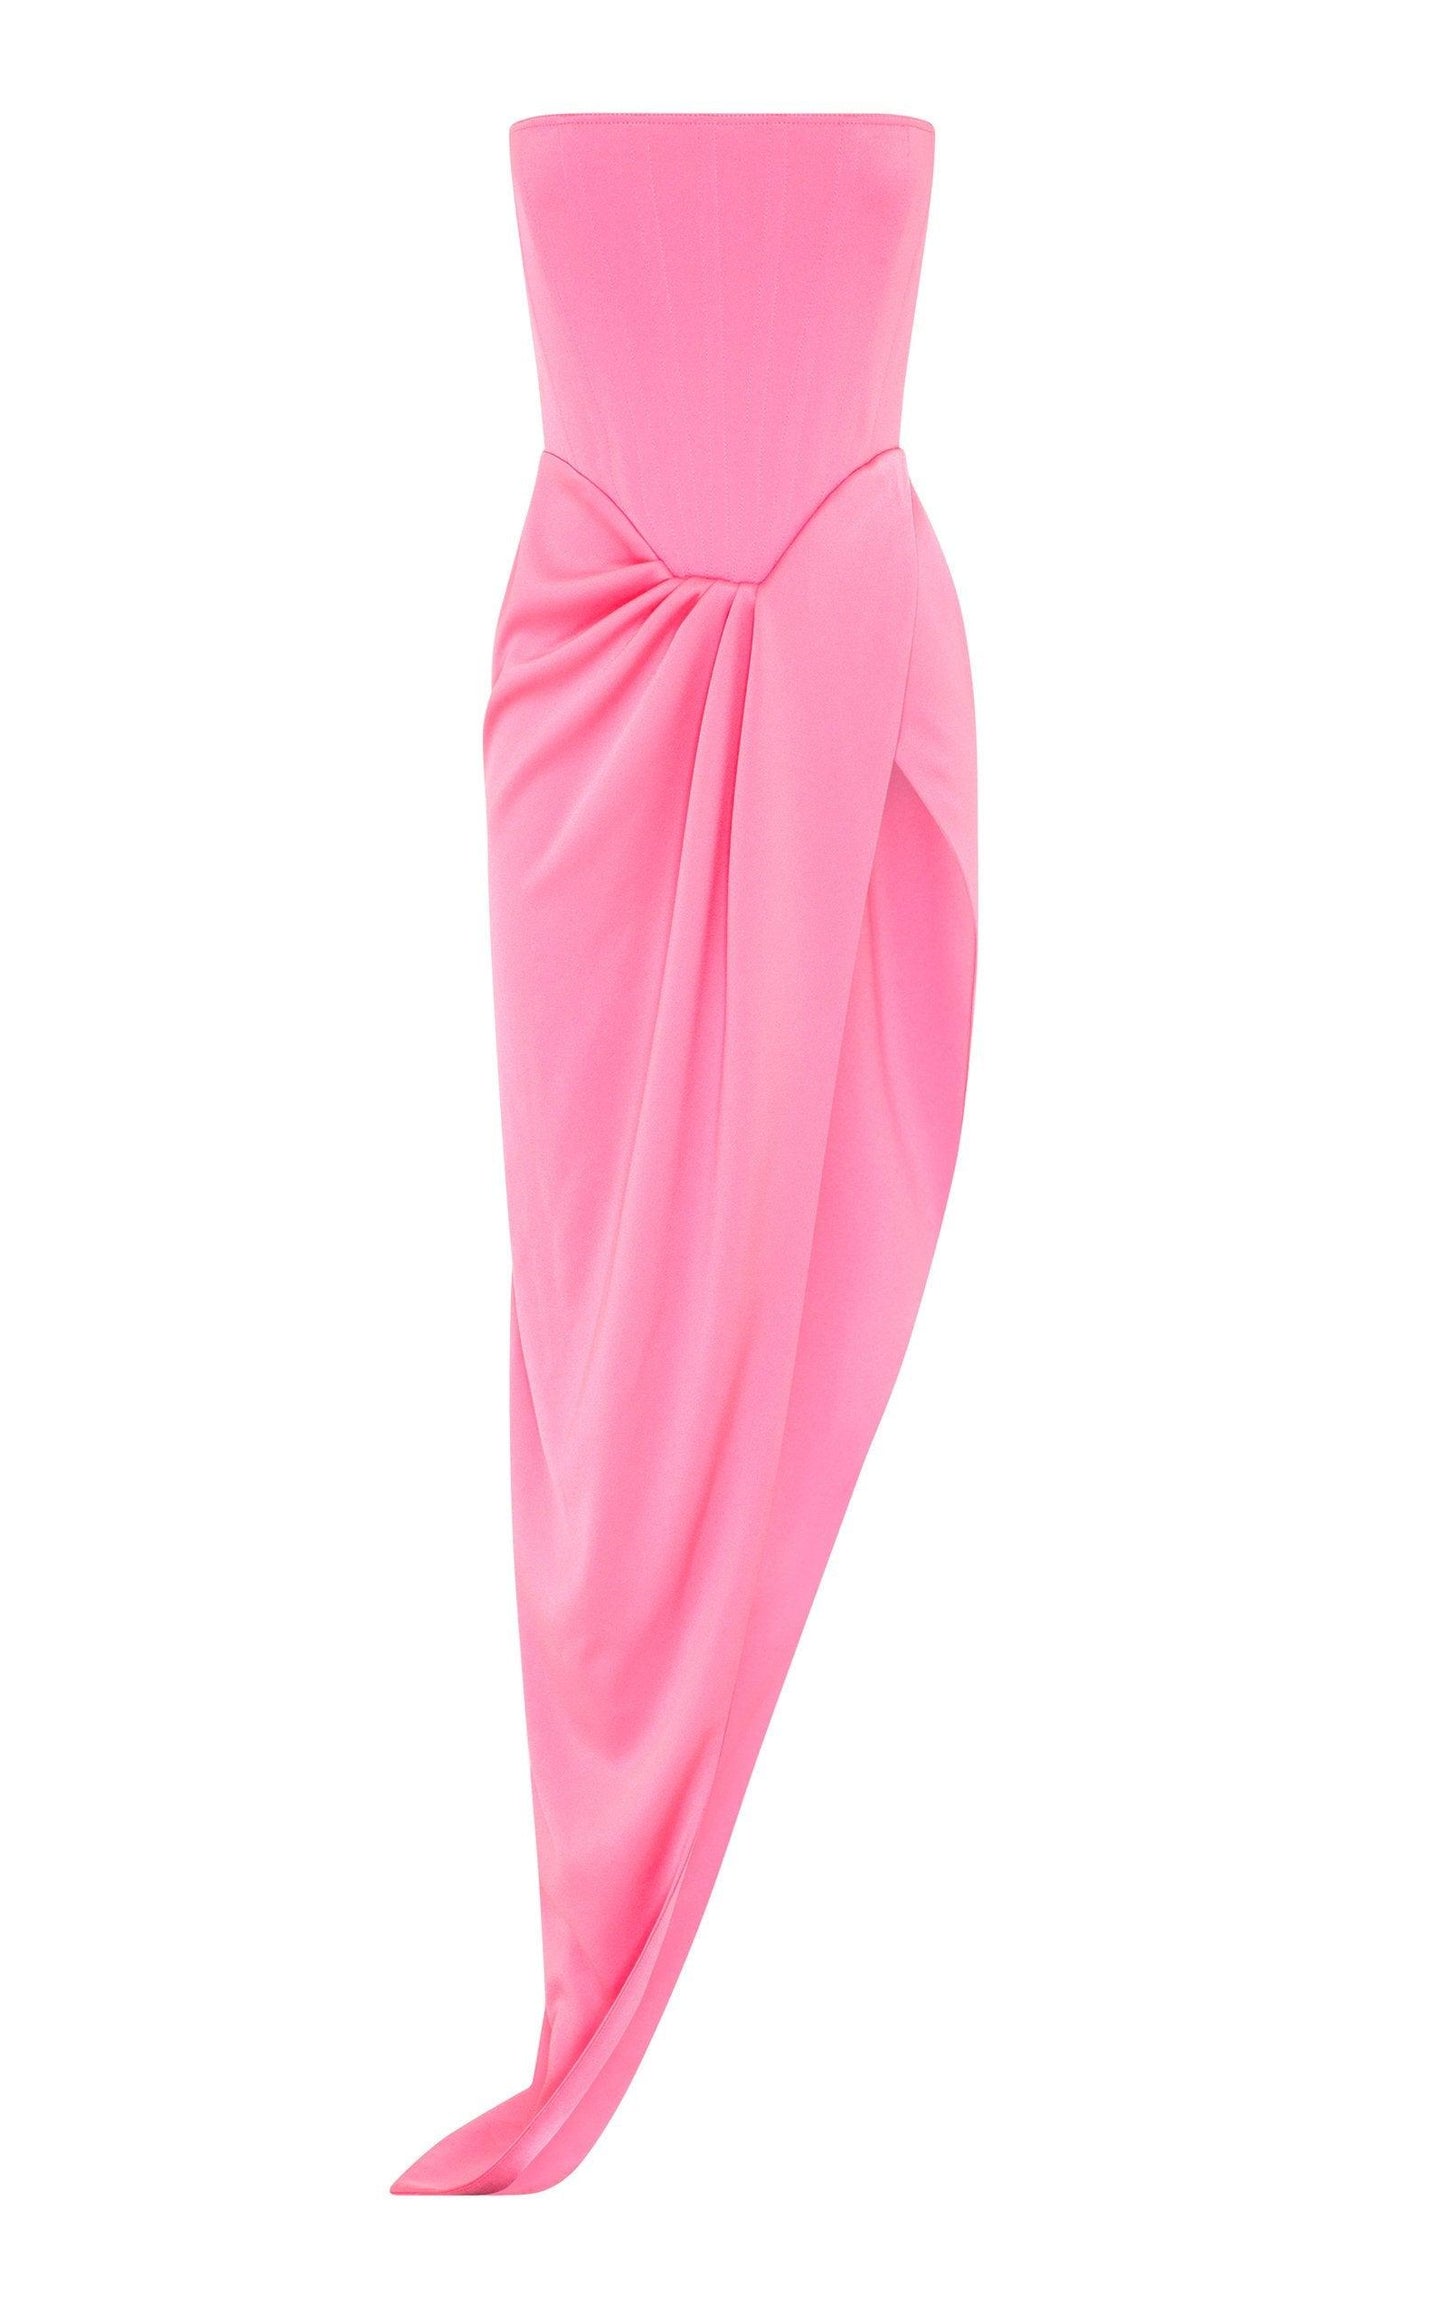  Alex PerryLedger Satin-Crepe Strapless Gown - Runway Catalog